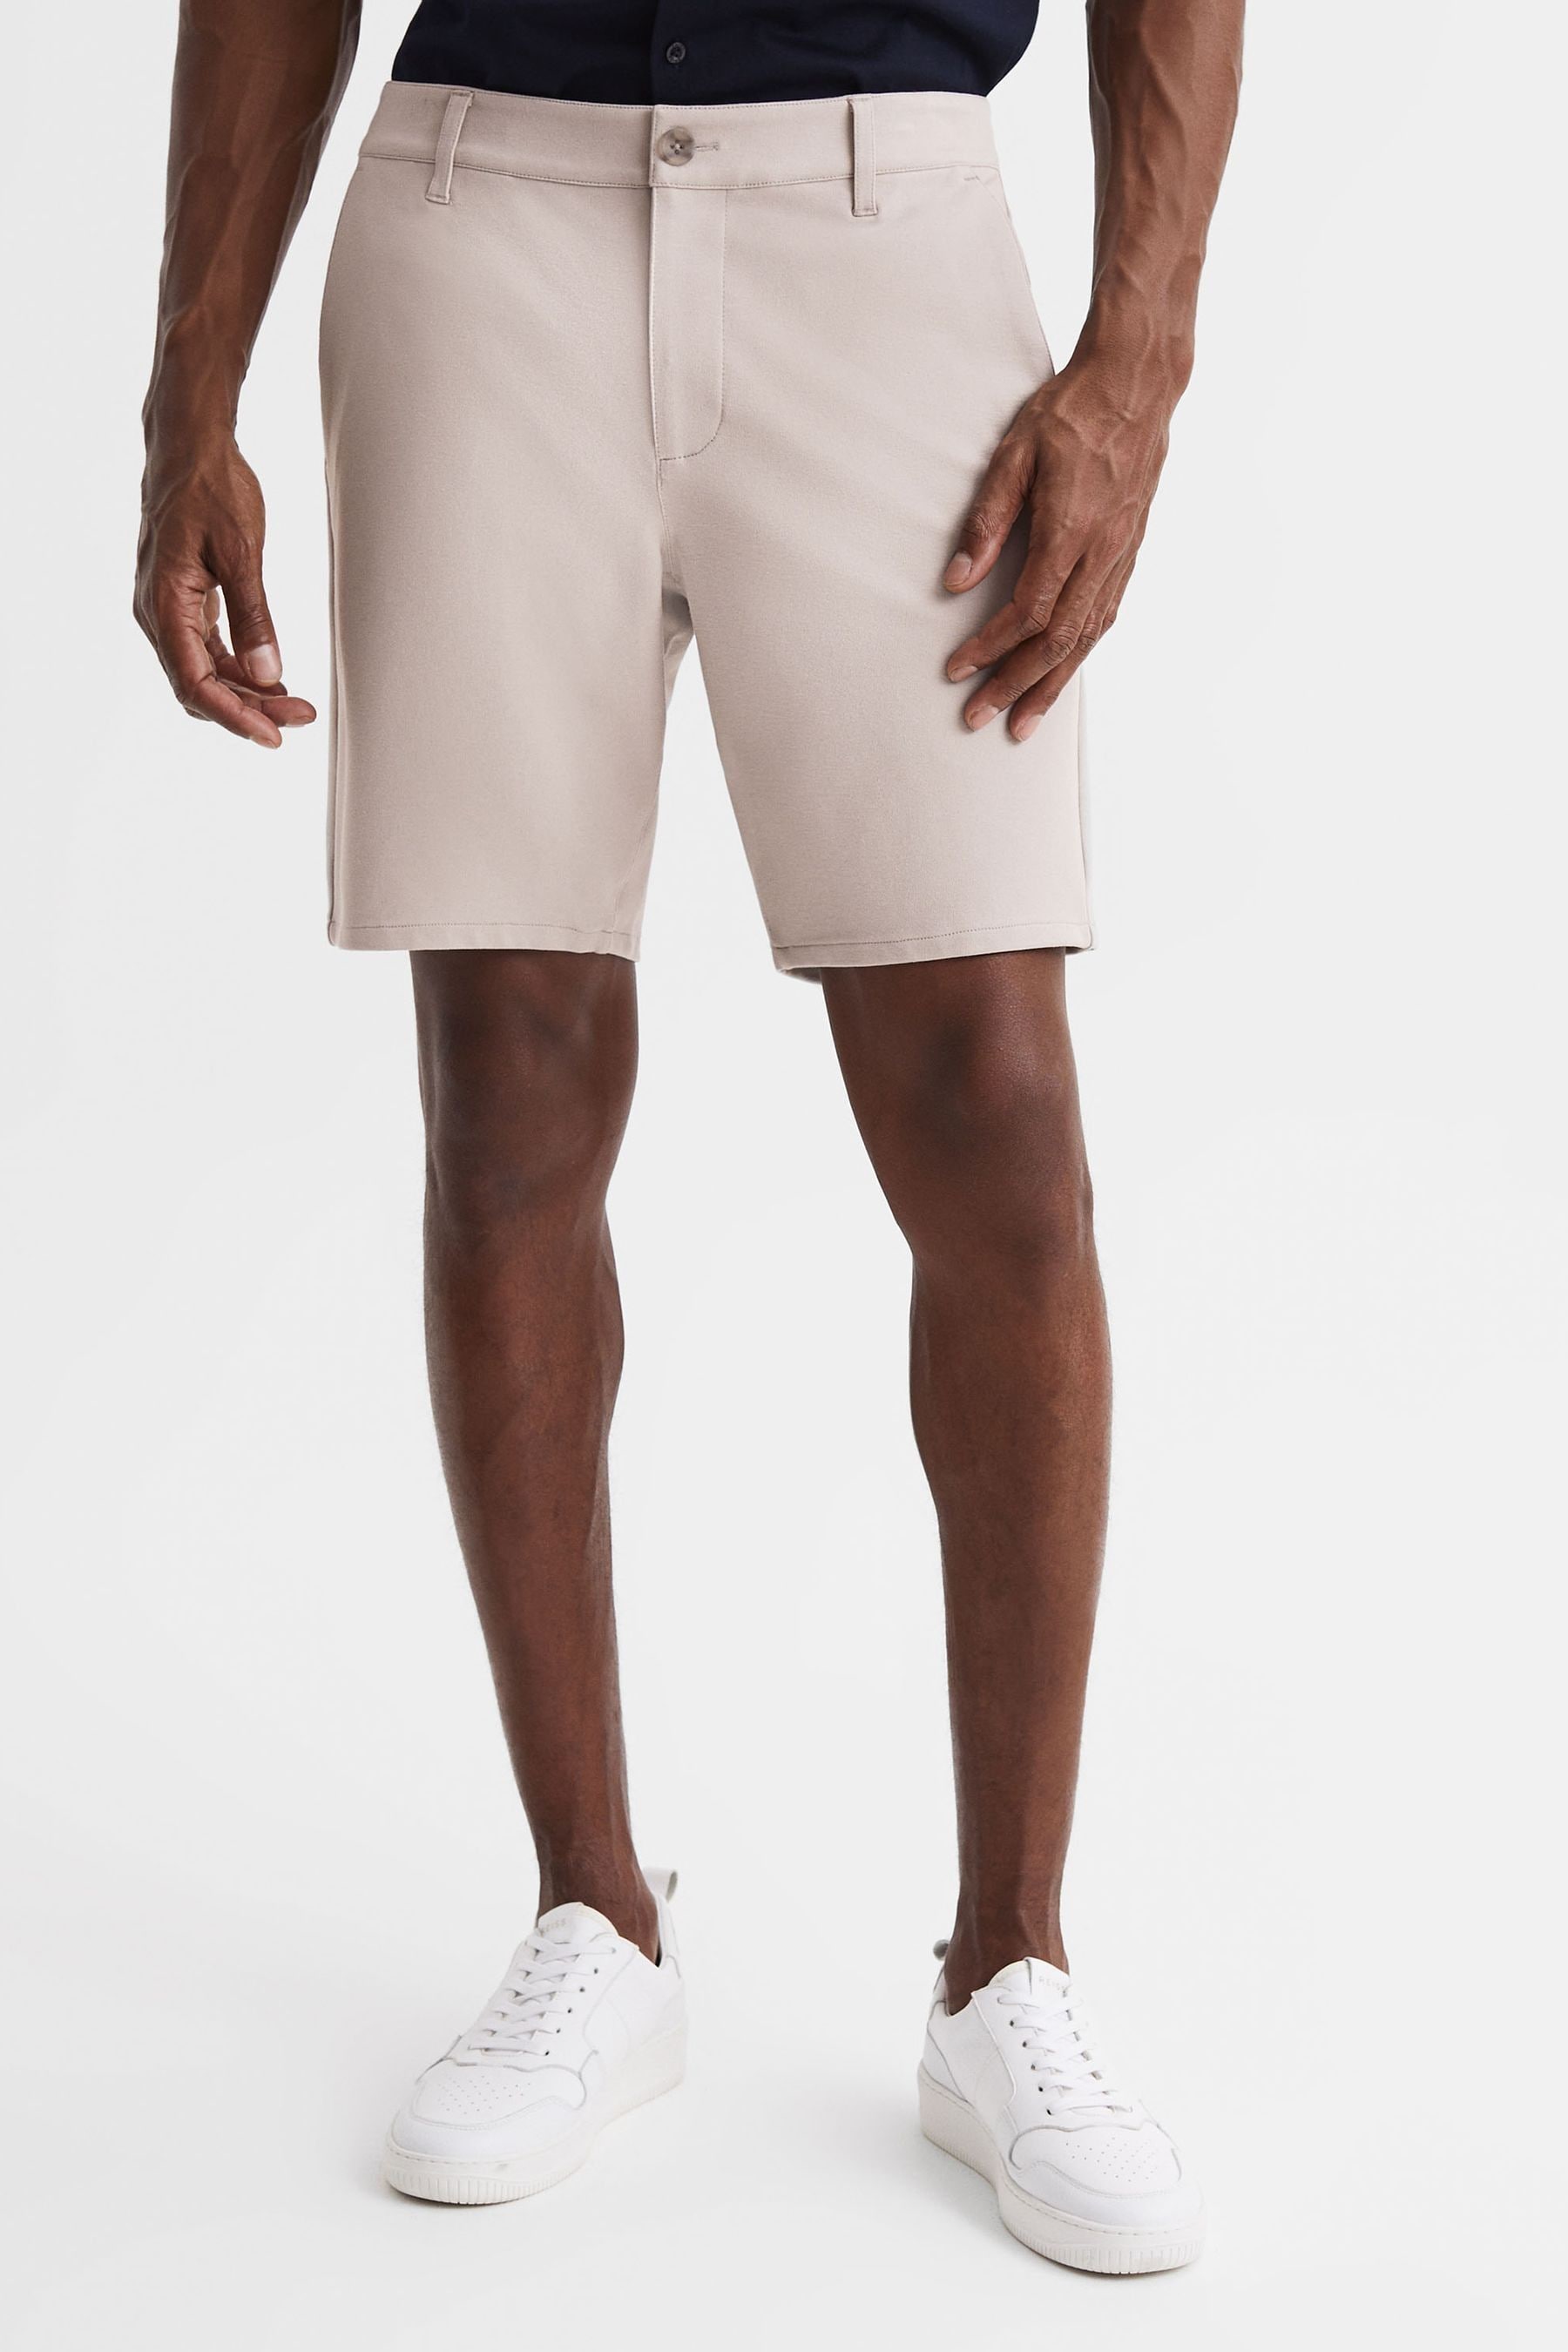 PAIGE - Chino Shorts, Oyster